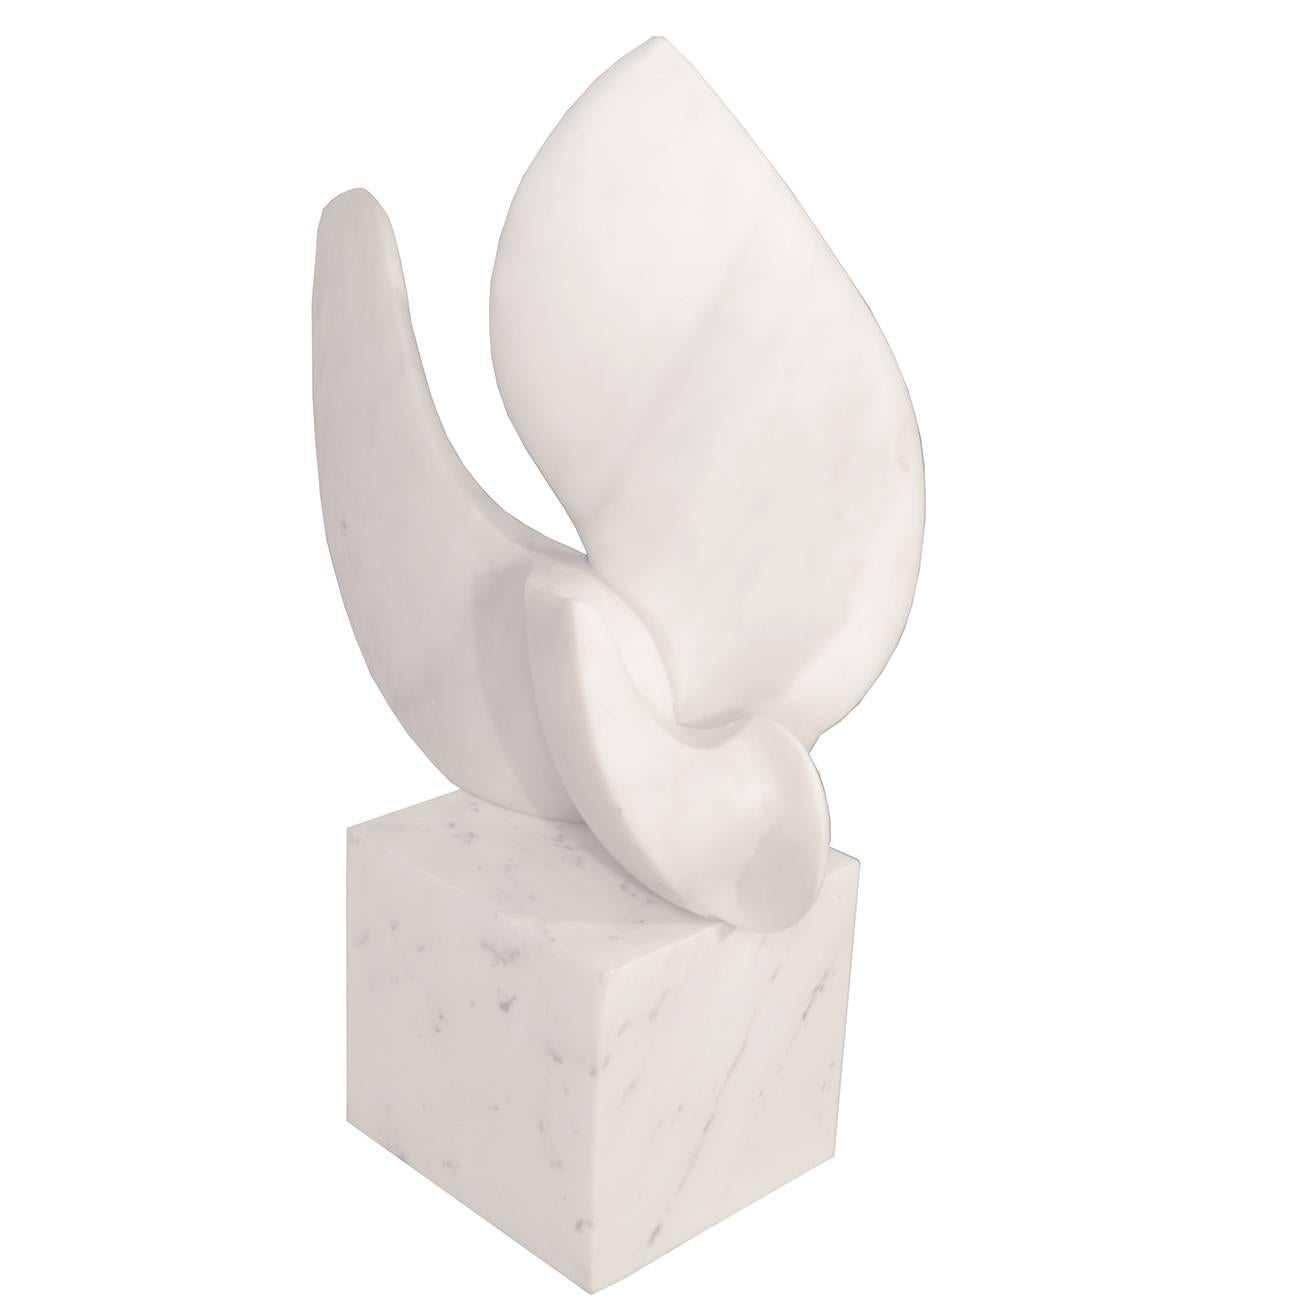 A modernist sculpture of a bird, possibly a swan, carved in marble by Jack Zajac, b. 1929. The sculpture is reminiscent of works by Hepworth, Noguchi and Brancusi.